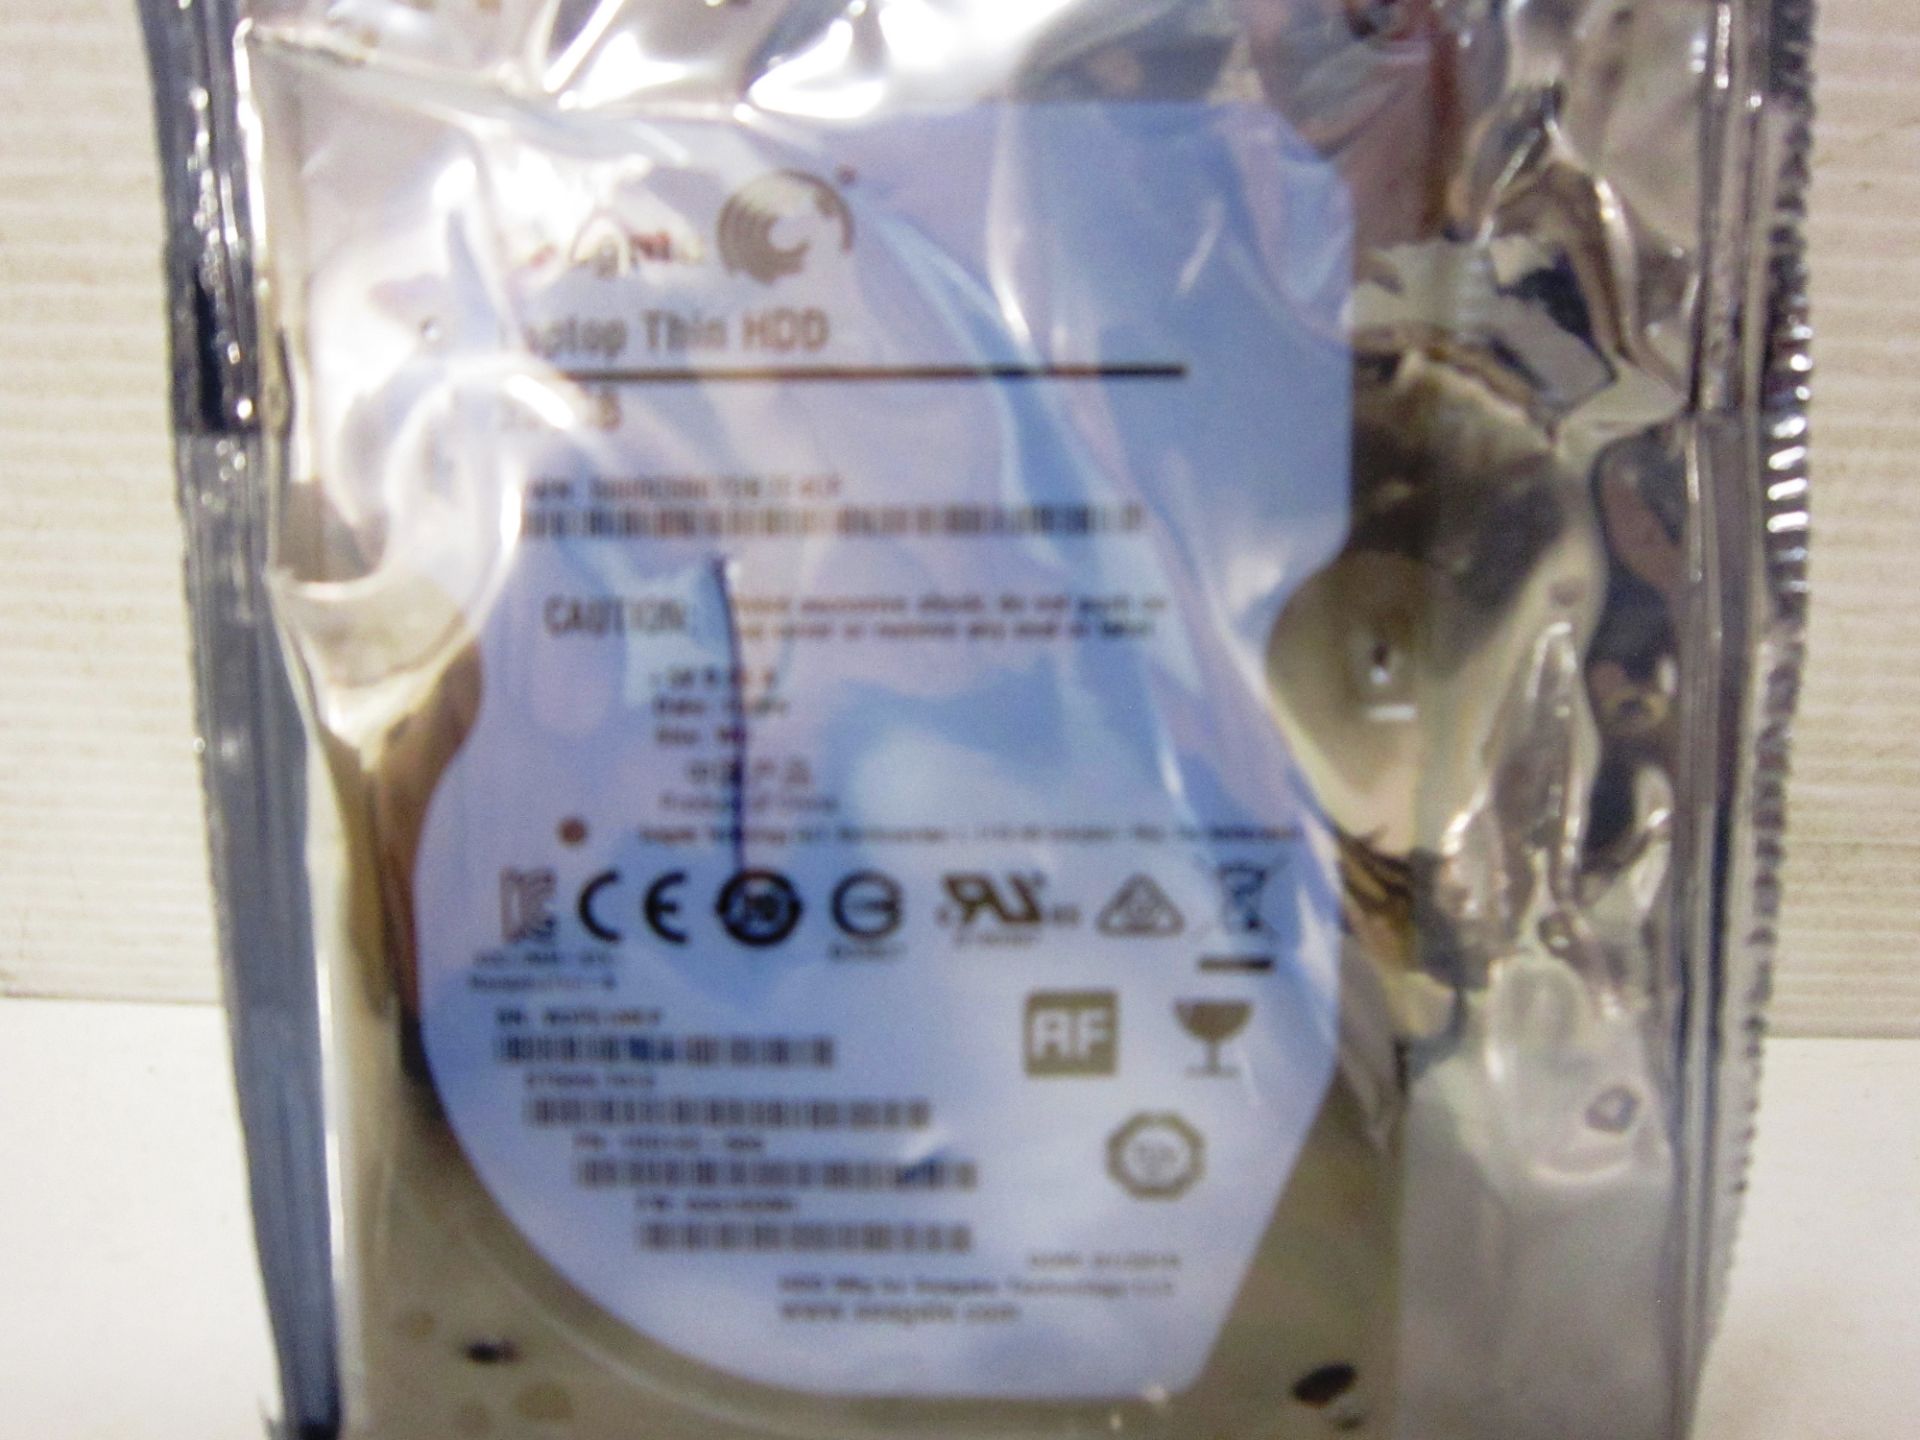 Seagate Momentus ST500LT012 Laptop thin HDD 500GB laptop hard disk drives brand new and sealed